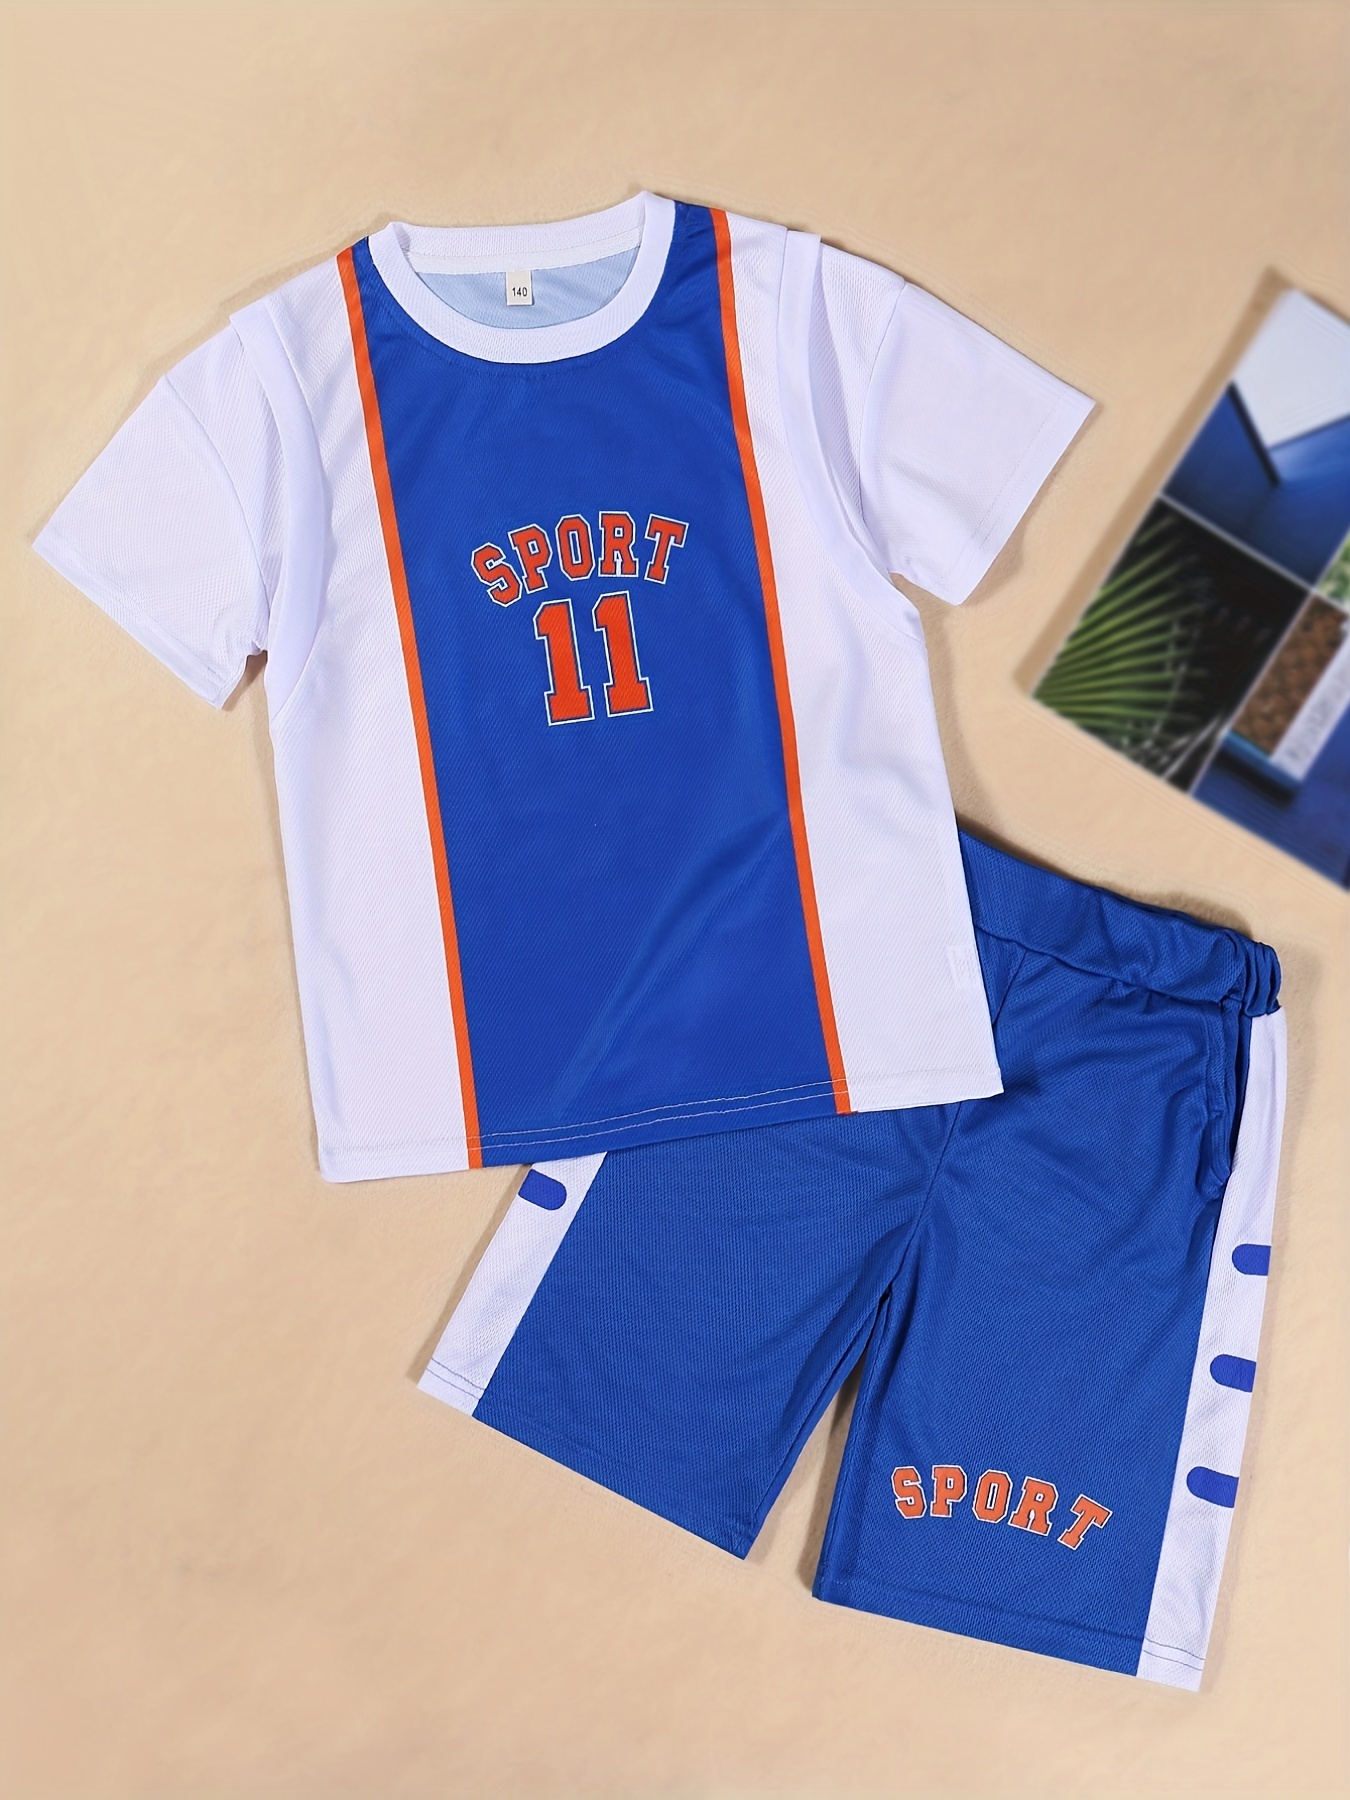 Boys Basketball Graphic Outfit Short Sleeves Round Neck T-shirt & Shorts  Casual For Summer Kids Clothes